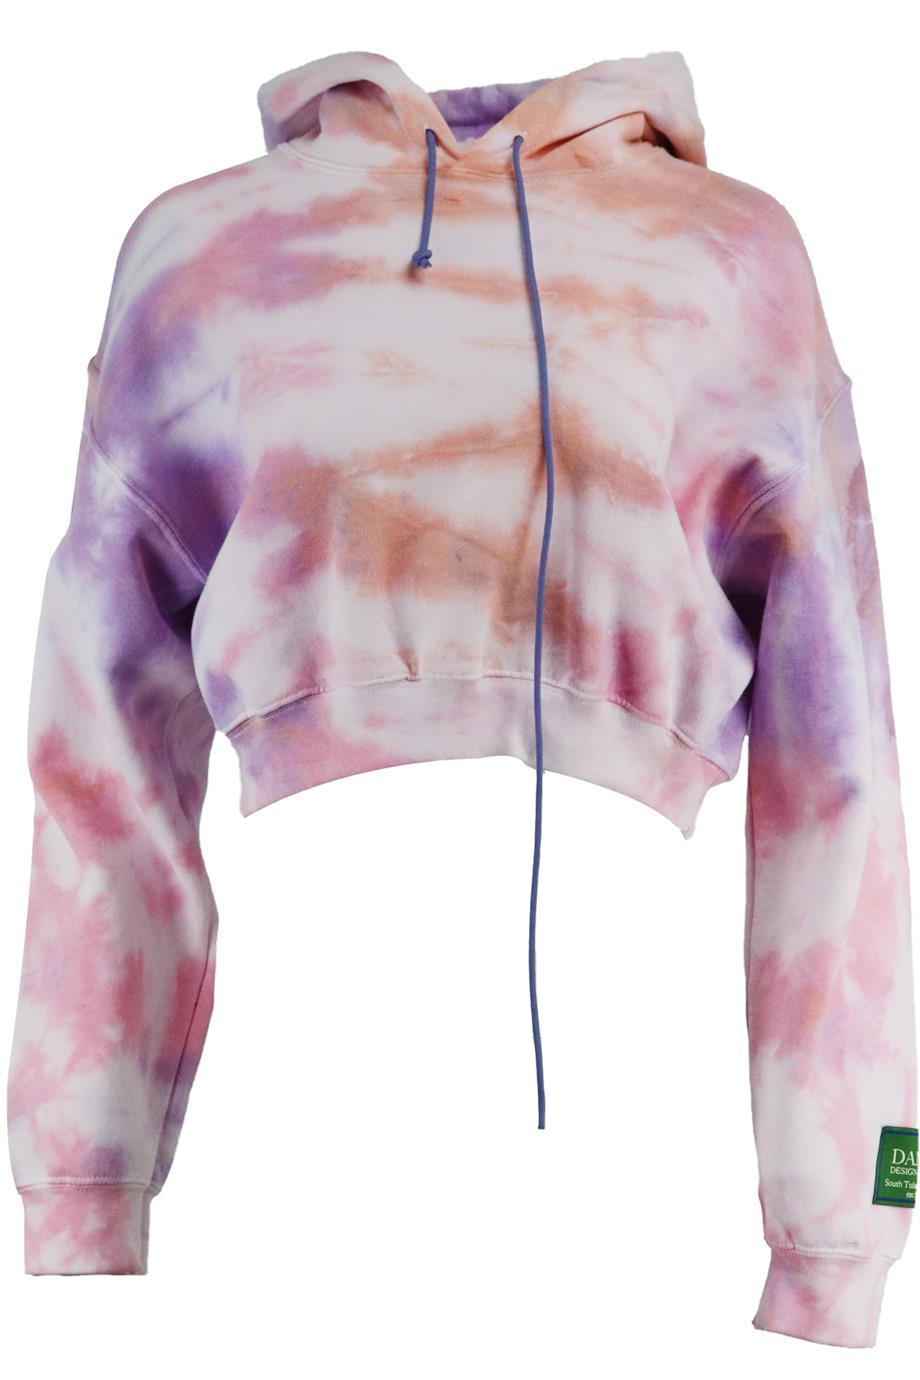 DANZY CROPPED TIE DYED COTTON JERSEY HOODIE MEDIUM